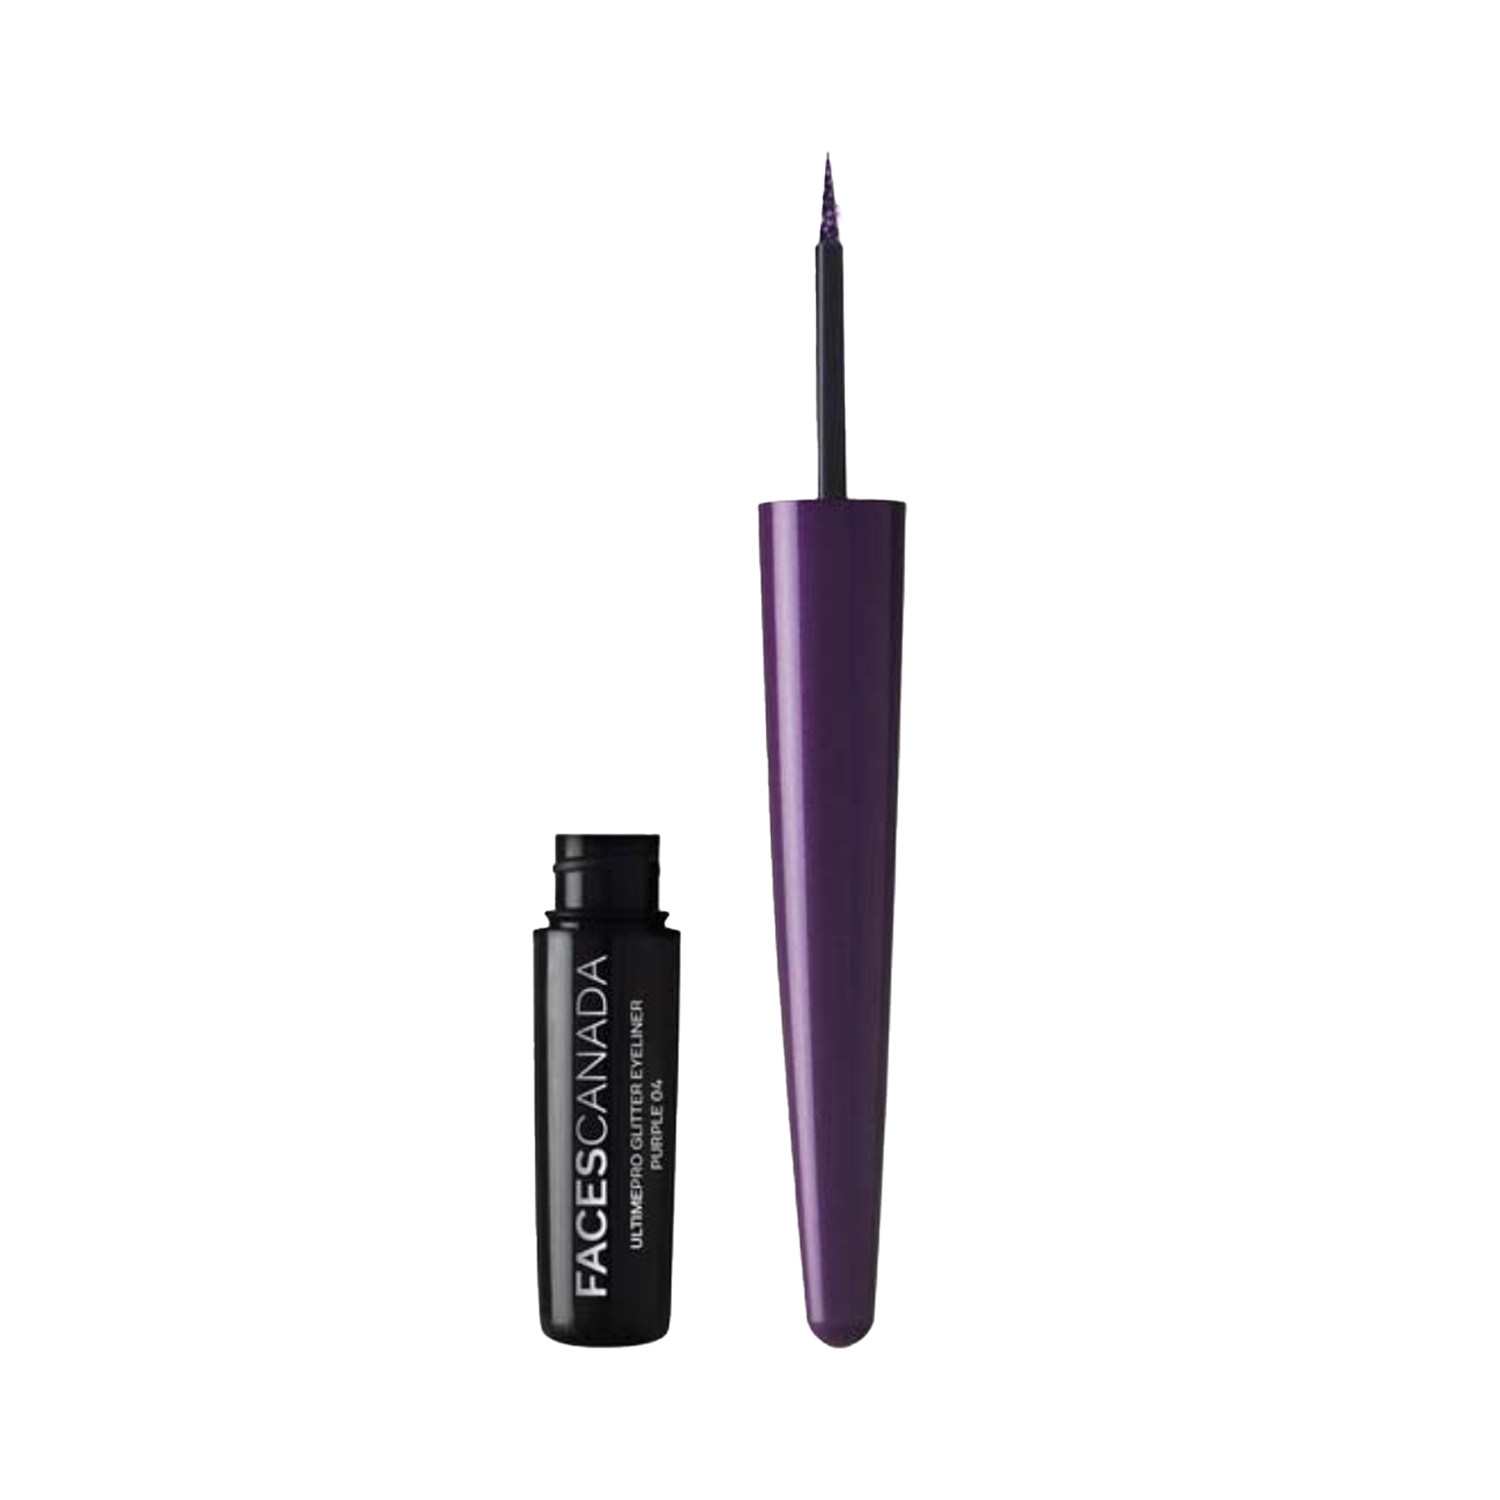 Faces Canada | Faces Canada Ultime Pro Glitter Eyeliner - 04 Purple (1.7ml)